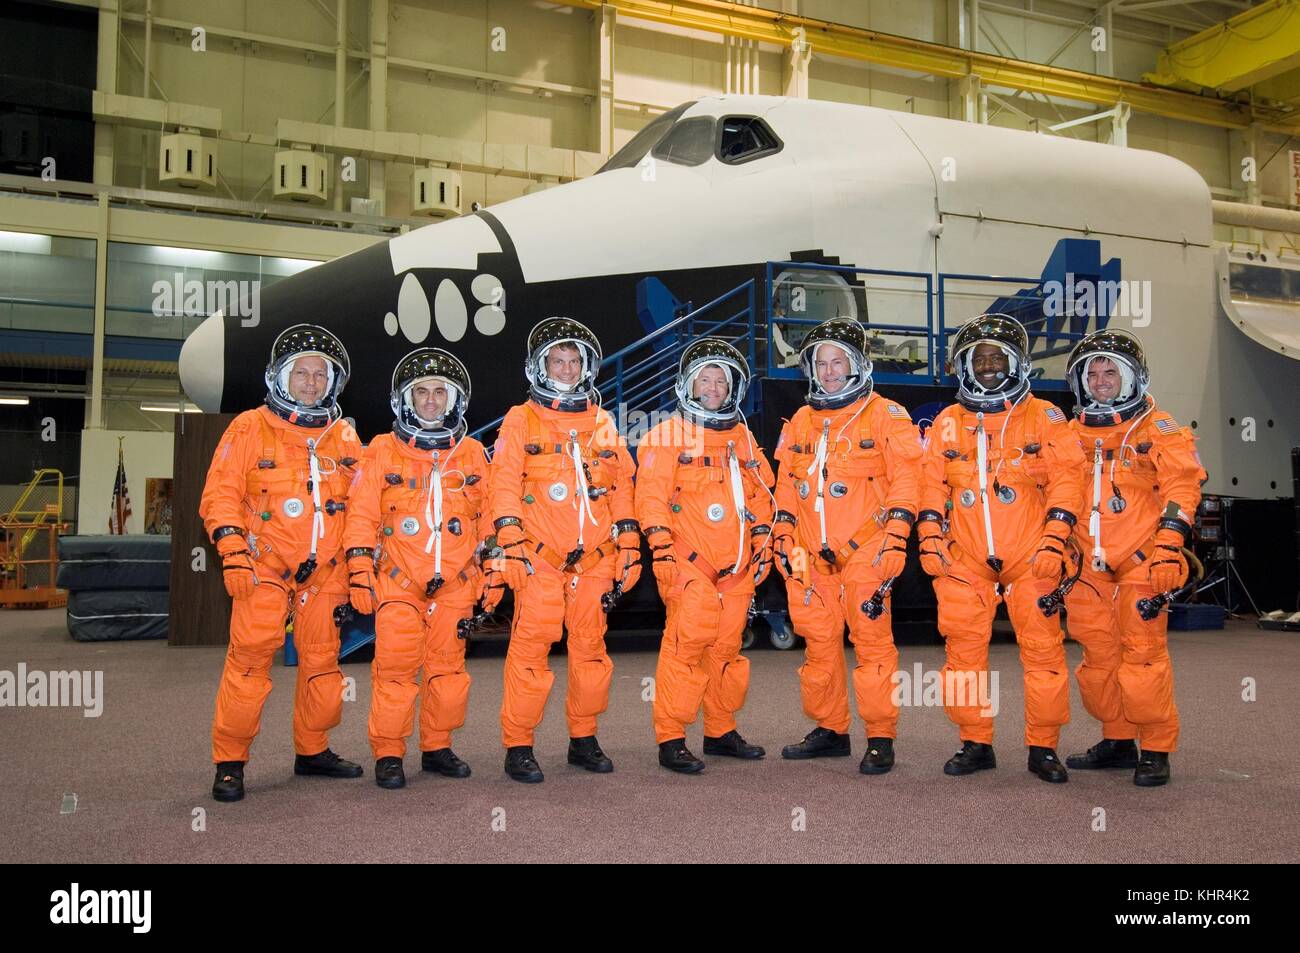 NASA International Space Station Space Shuttle Atlantis STS-122 mission prime crew members (L-R) German astronaut Hans Schlegel and French astronaut Leopold Eyharts from the European Space Agency, and American astronauts Stanley Love, Stephen Frick, Alan Poindexter, Leland Melvin and Rex Walhein wear orange launch and entry spacesuits during a pre-launch training session at the Johnson Space Center Space Vehicle Mockup Facility May 1, 2007 in Houston, Texas.  (photo by NASA Photo via Planetpix) Stock Photo